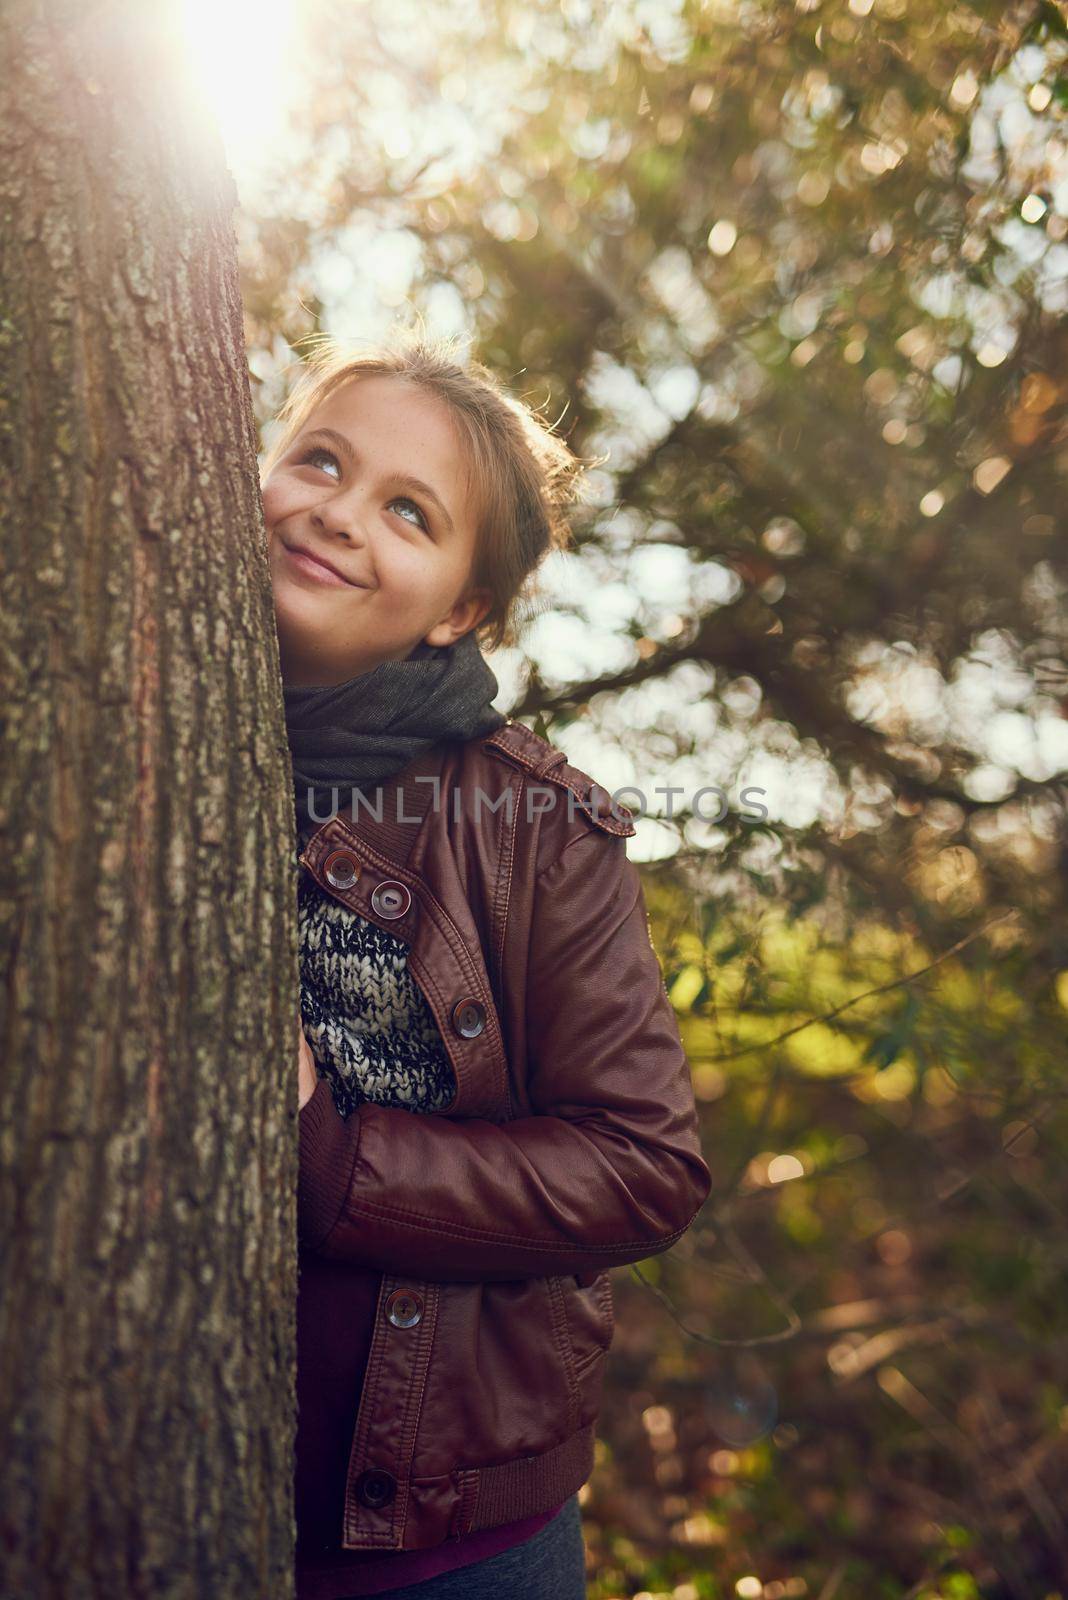 Shot of a little girl playing outdoors in a forest.